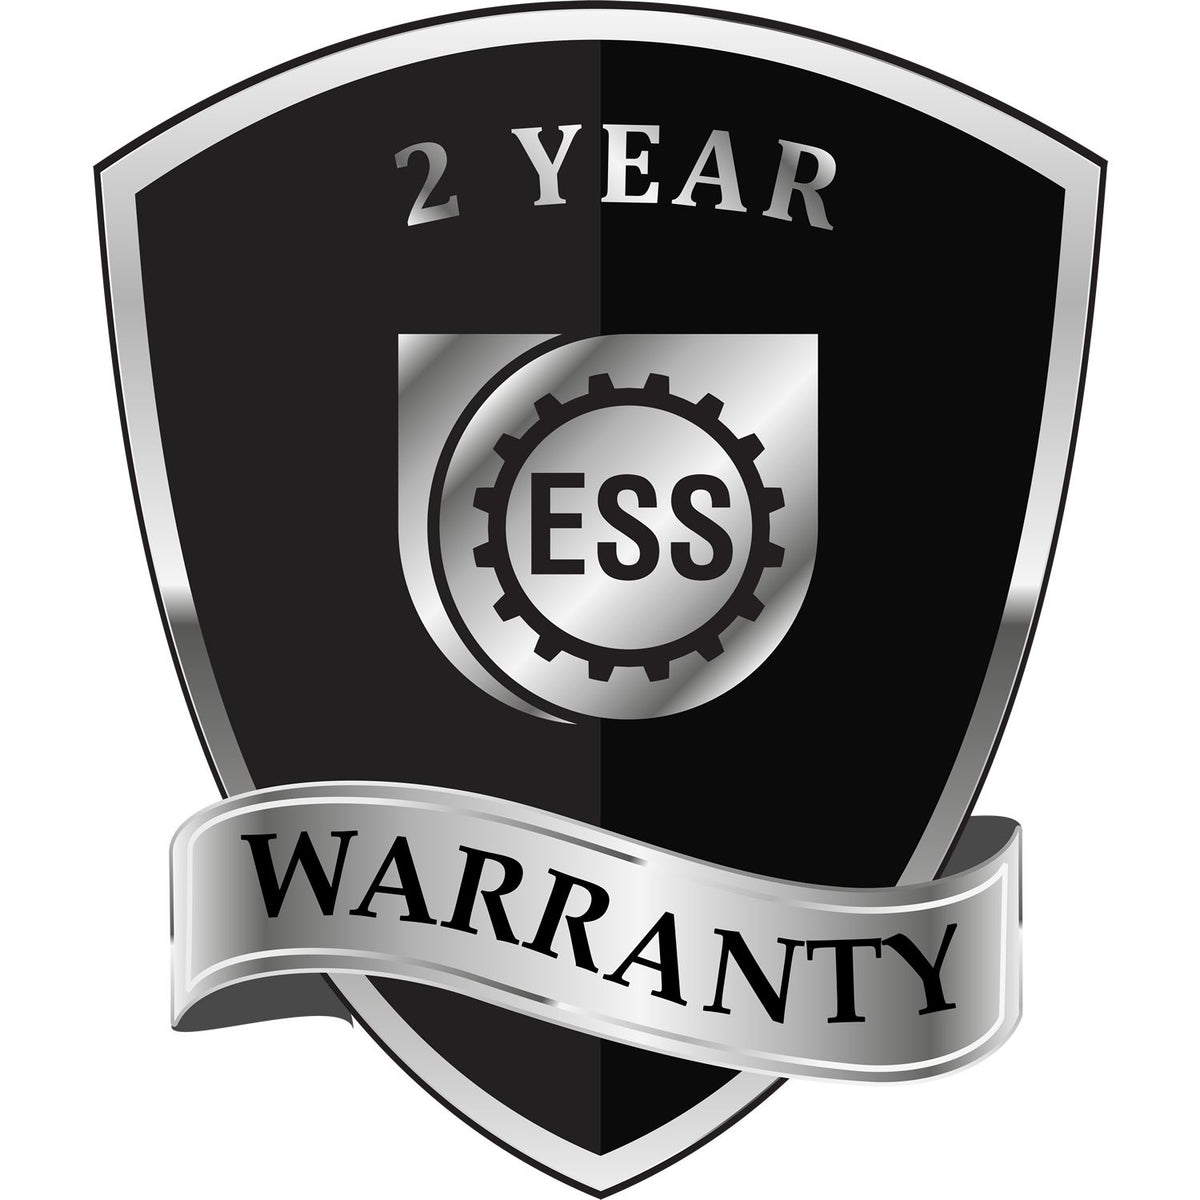 A badge or emblem showing a warranty icon for the State of Kentucky Extended Long Reach Engineer Seal